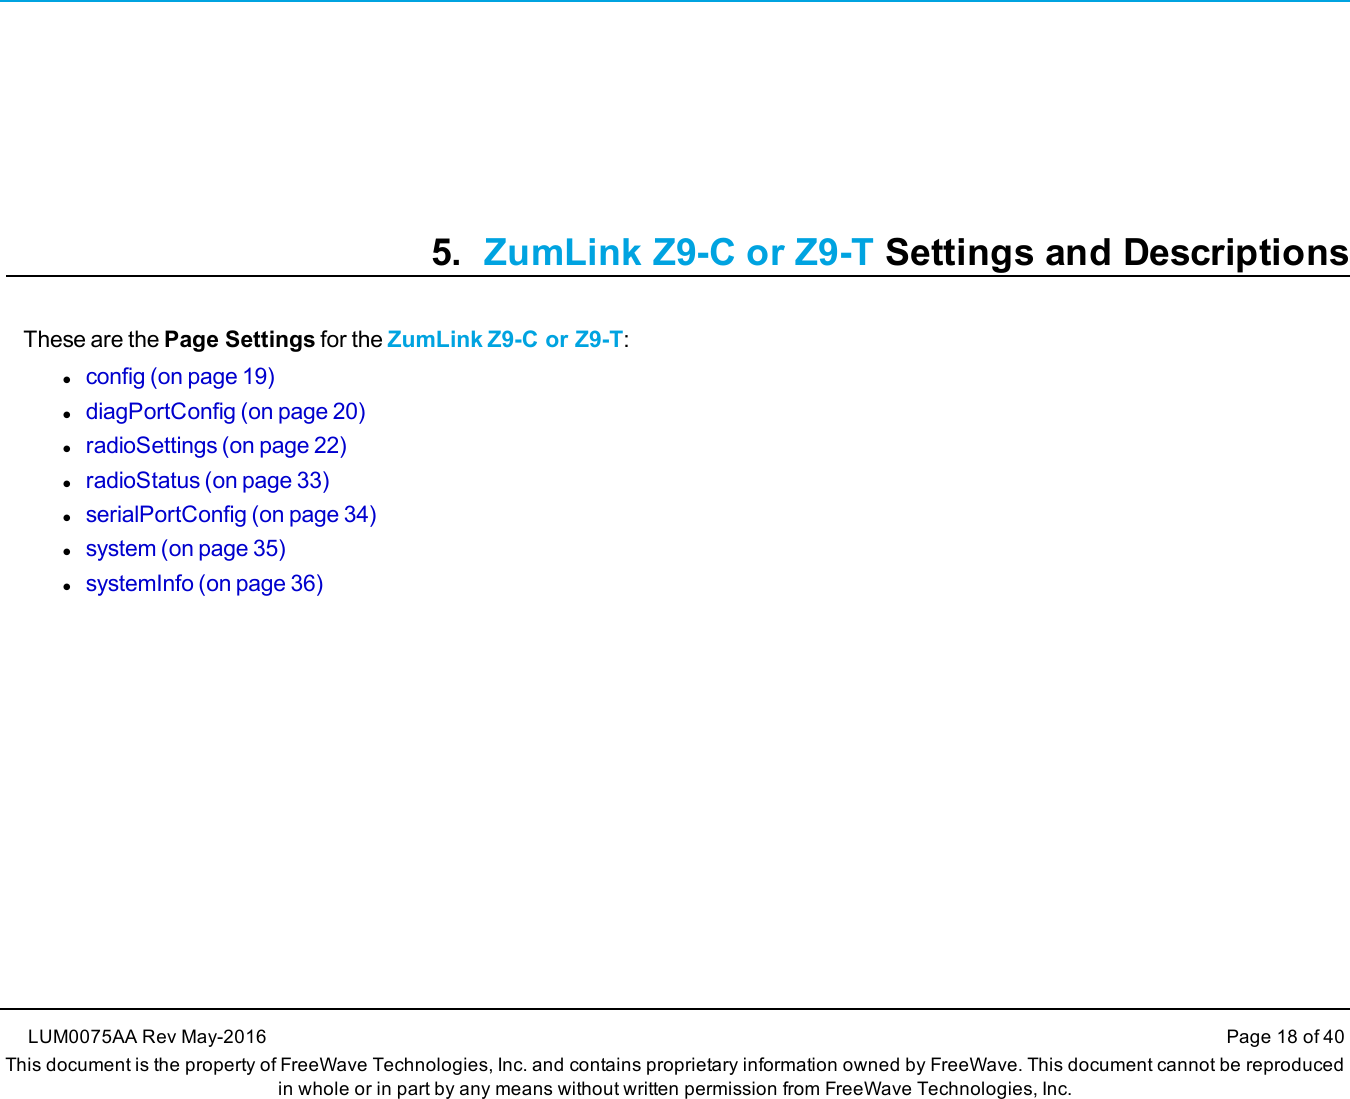 5. ZumLink Z9-C or Z9-T Settings and DescriptionsThese are the Page Settings for the ZumLink Z9-C or Z9-T:lconfig (on page 19)ldiagPortConfig (on page 20)lradioSettings (on page 22)lradioStatus (on page 33)lserialPortConfig (on page 34)lsystem (on page 35)lsystemInfo (on page 36)LUM0075AA Rev May-2016 Page 18 of 40This document is the property of FreeWave Technologies, Inc. and contains proprietary information owned by FreeWave. This document cannot be reproducedin whole or in part by any means without written permission from FreeWave Technologies, Inc.